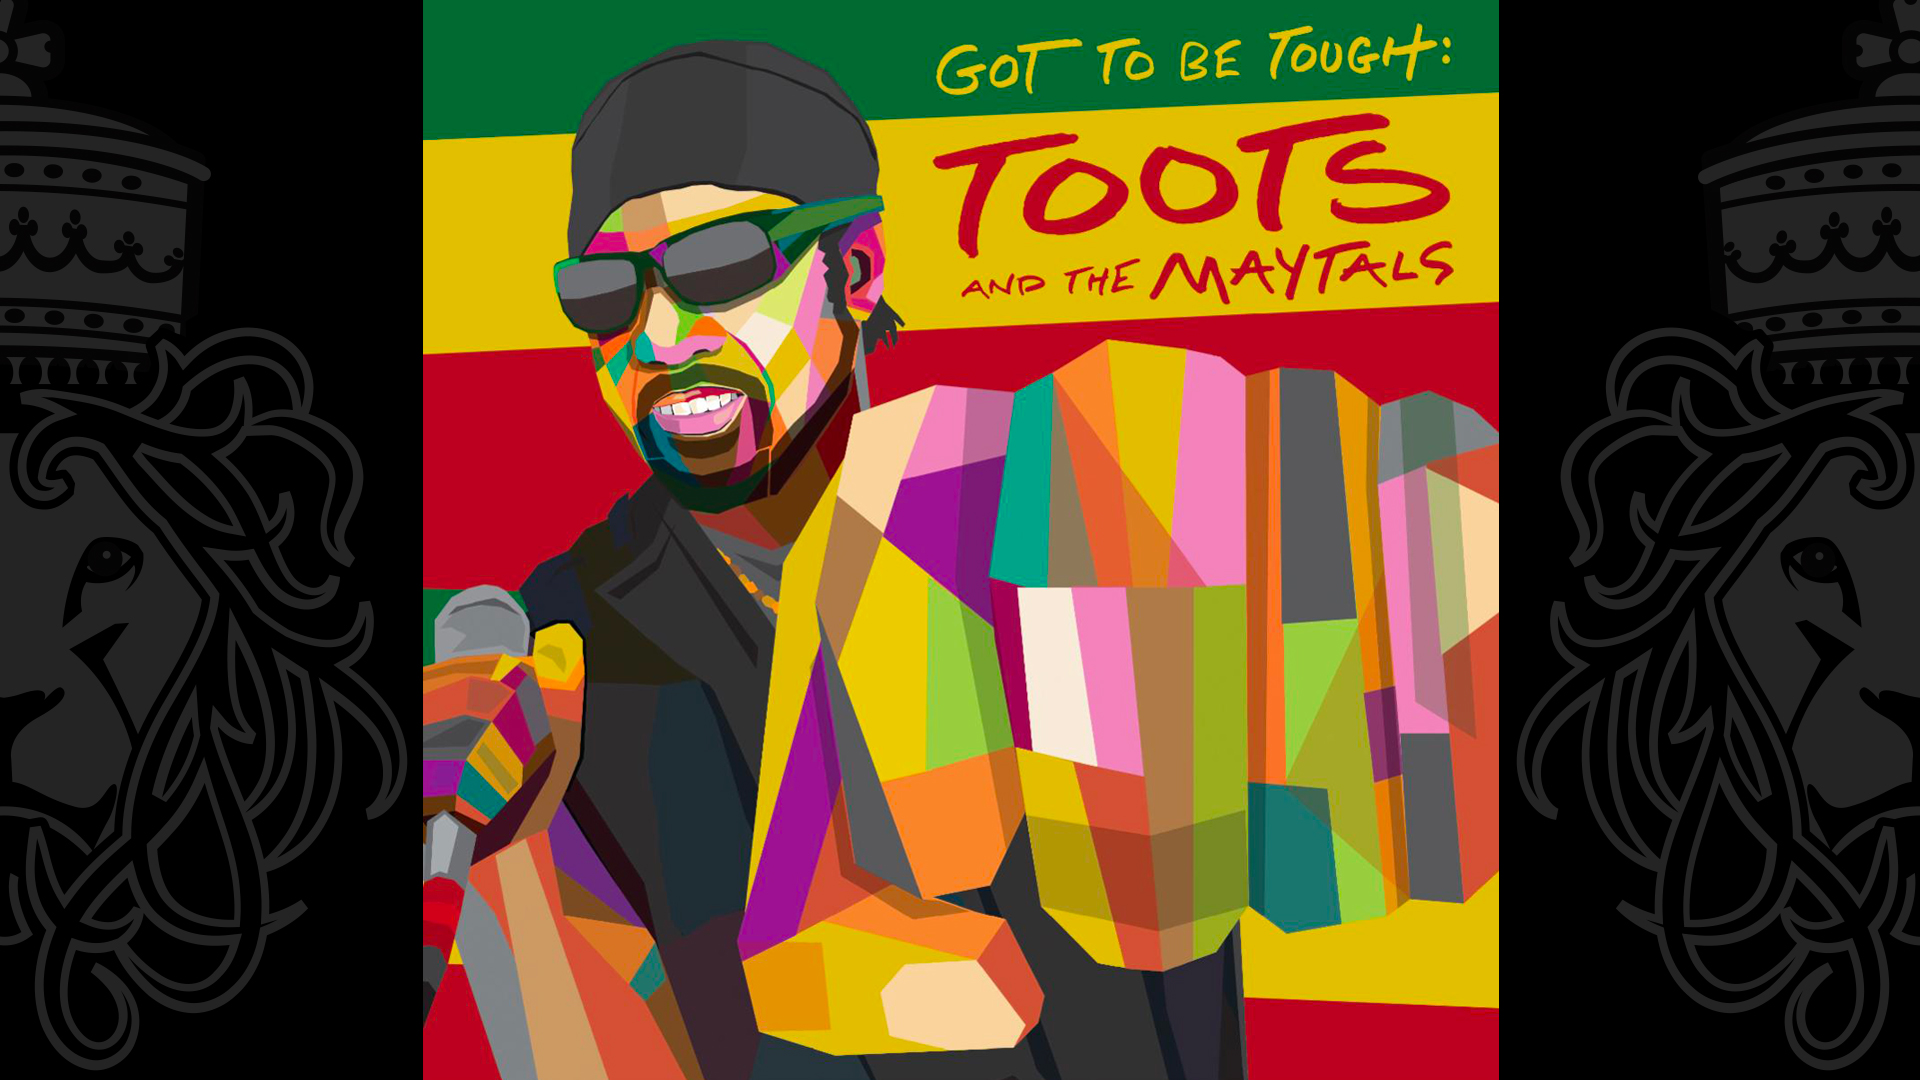 Toots and the Maytals release "Got To Be Tough" Album after a decade.